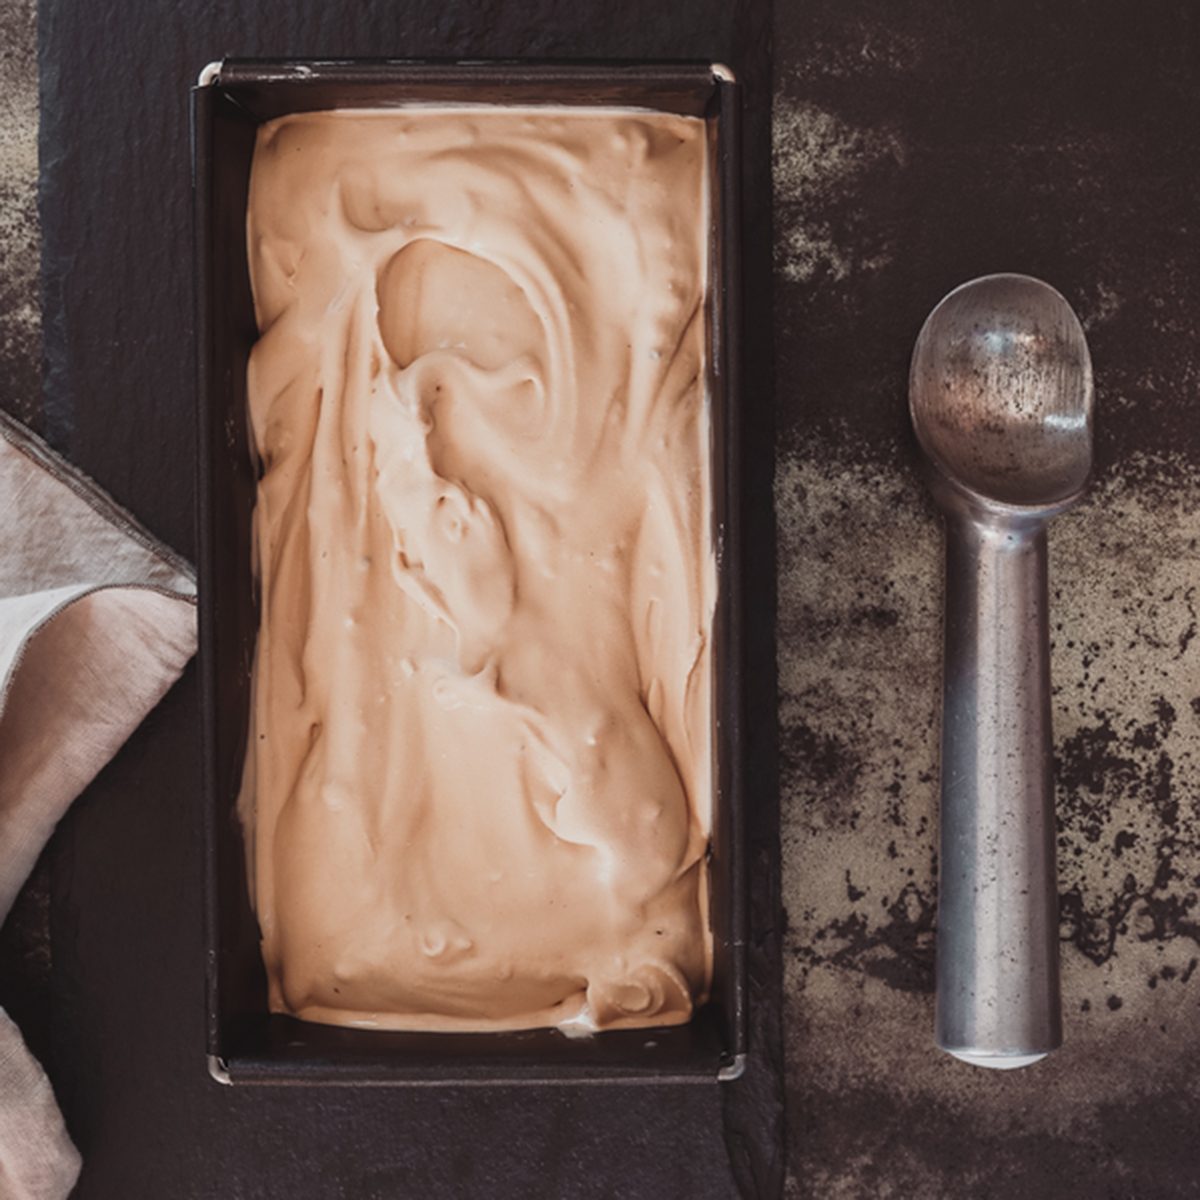 Homemade ice cream in frozen metallic tray on rustic surface. Top view, dark toned image, blank space; Shutterstock ID 569620816; Job (TFH, TOH, RD, BNB, CWM, CM): Taste of Home